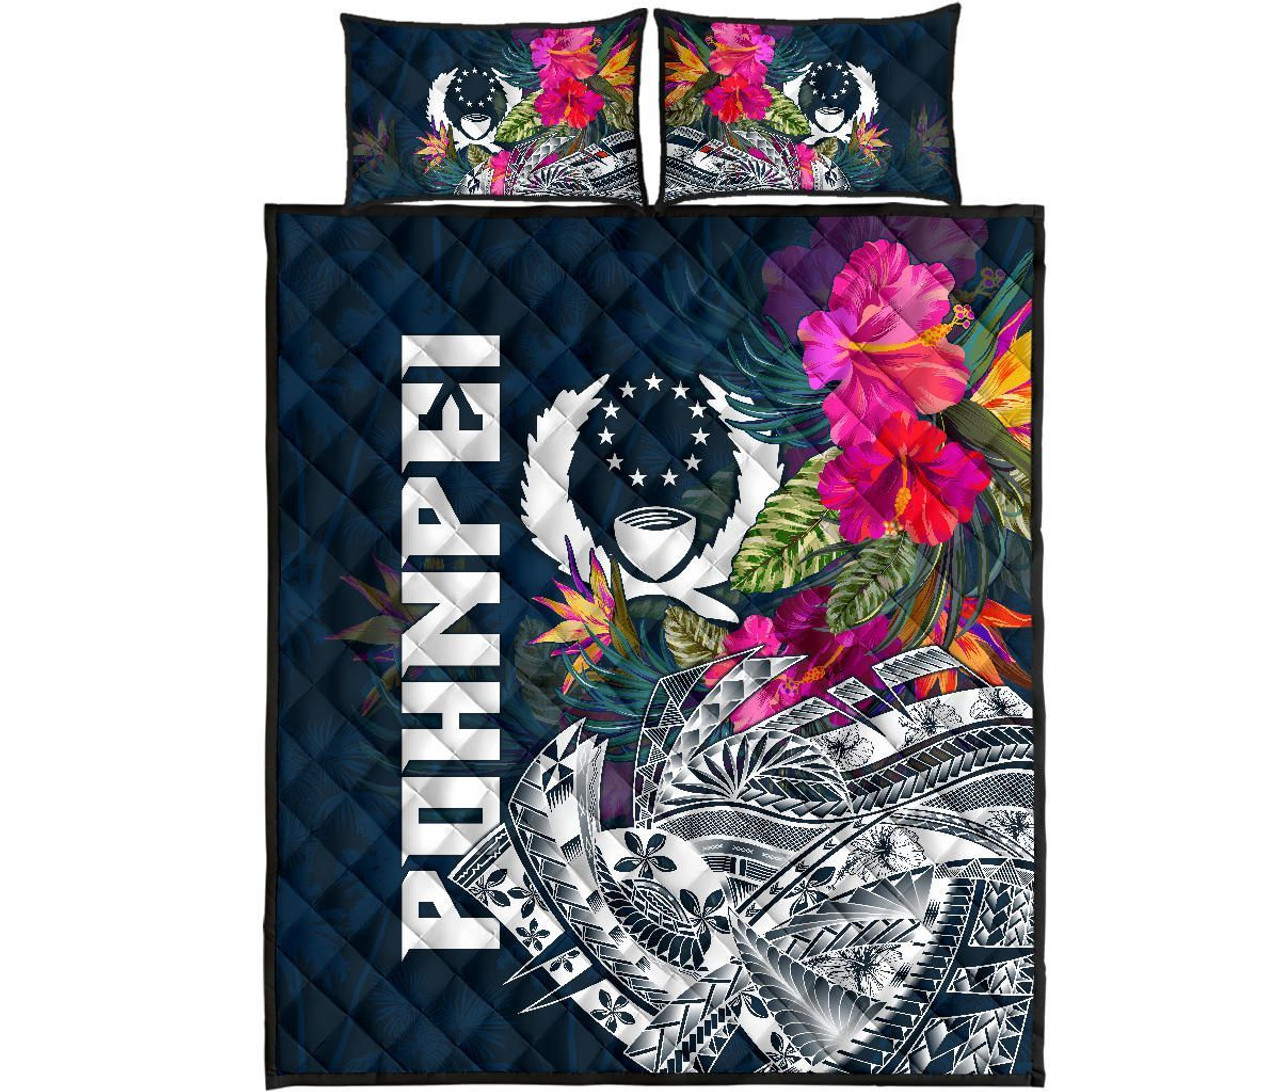 Pohnpei Quilt Bed Set - Pohnpei Summer Vibes 5